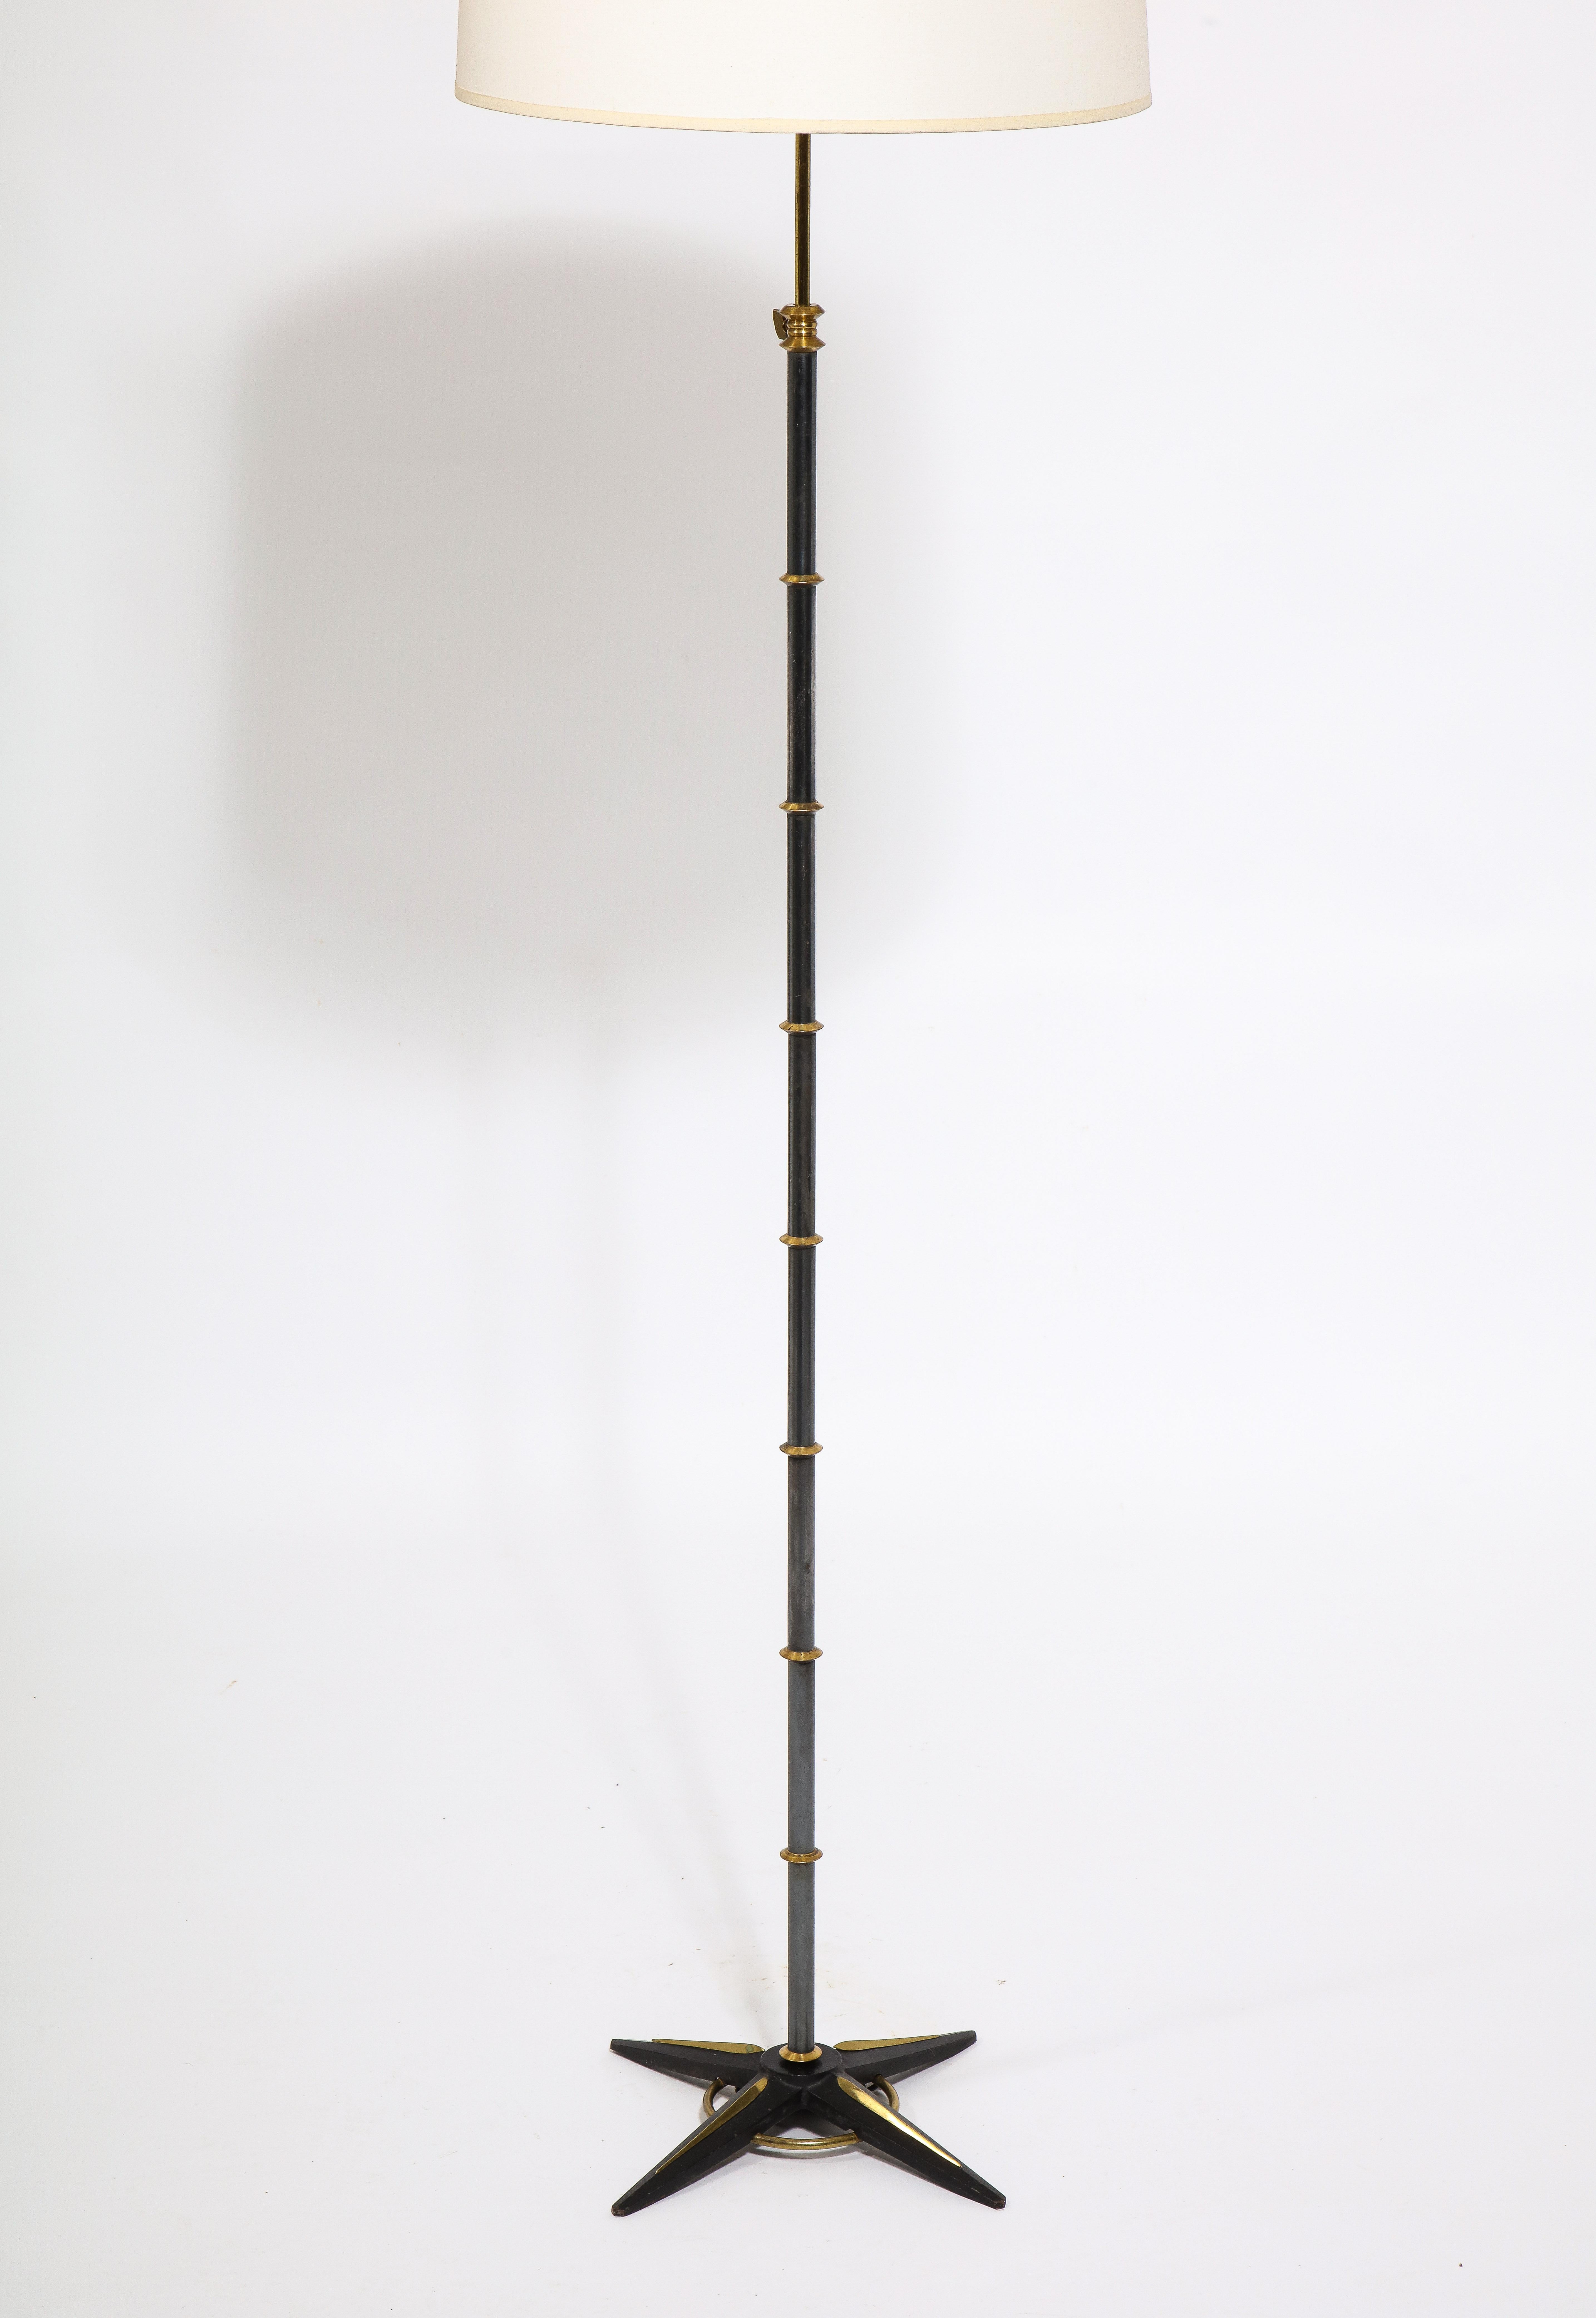 Lacquered Adjustable Height Floor Lamp by Gilles Sermadiras, France, 1950's For Sale